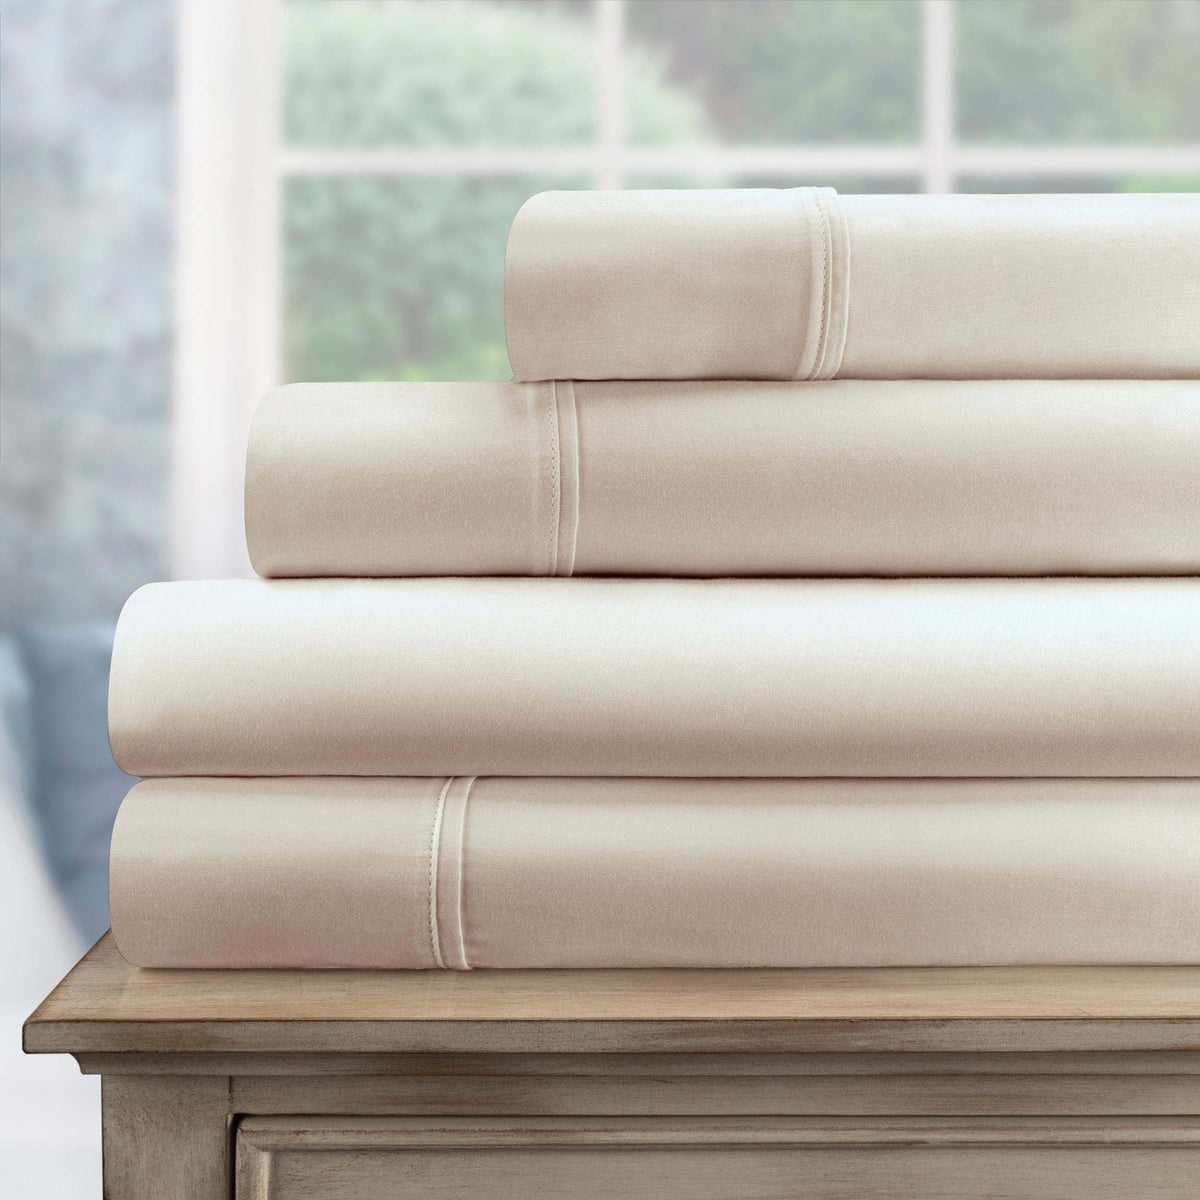 Egyptian Cotton 700 Thread Count Eco Friendly Solid Sheet Set